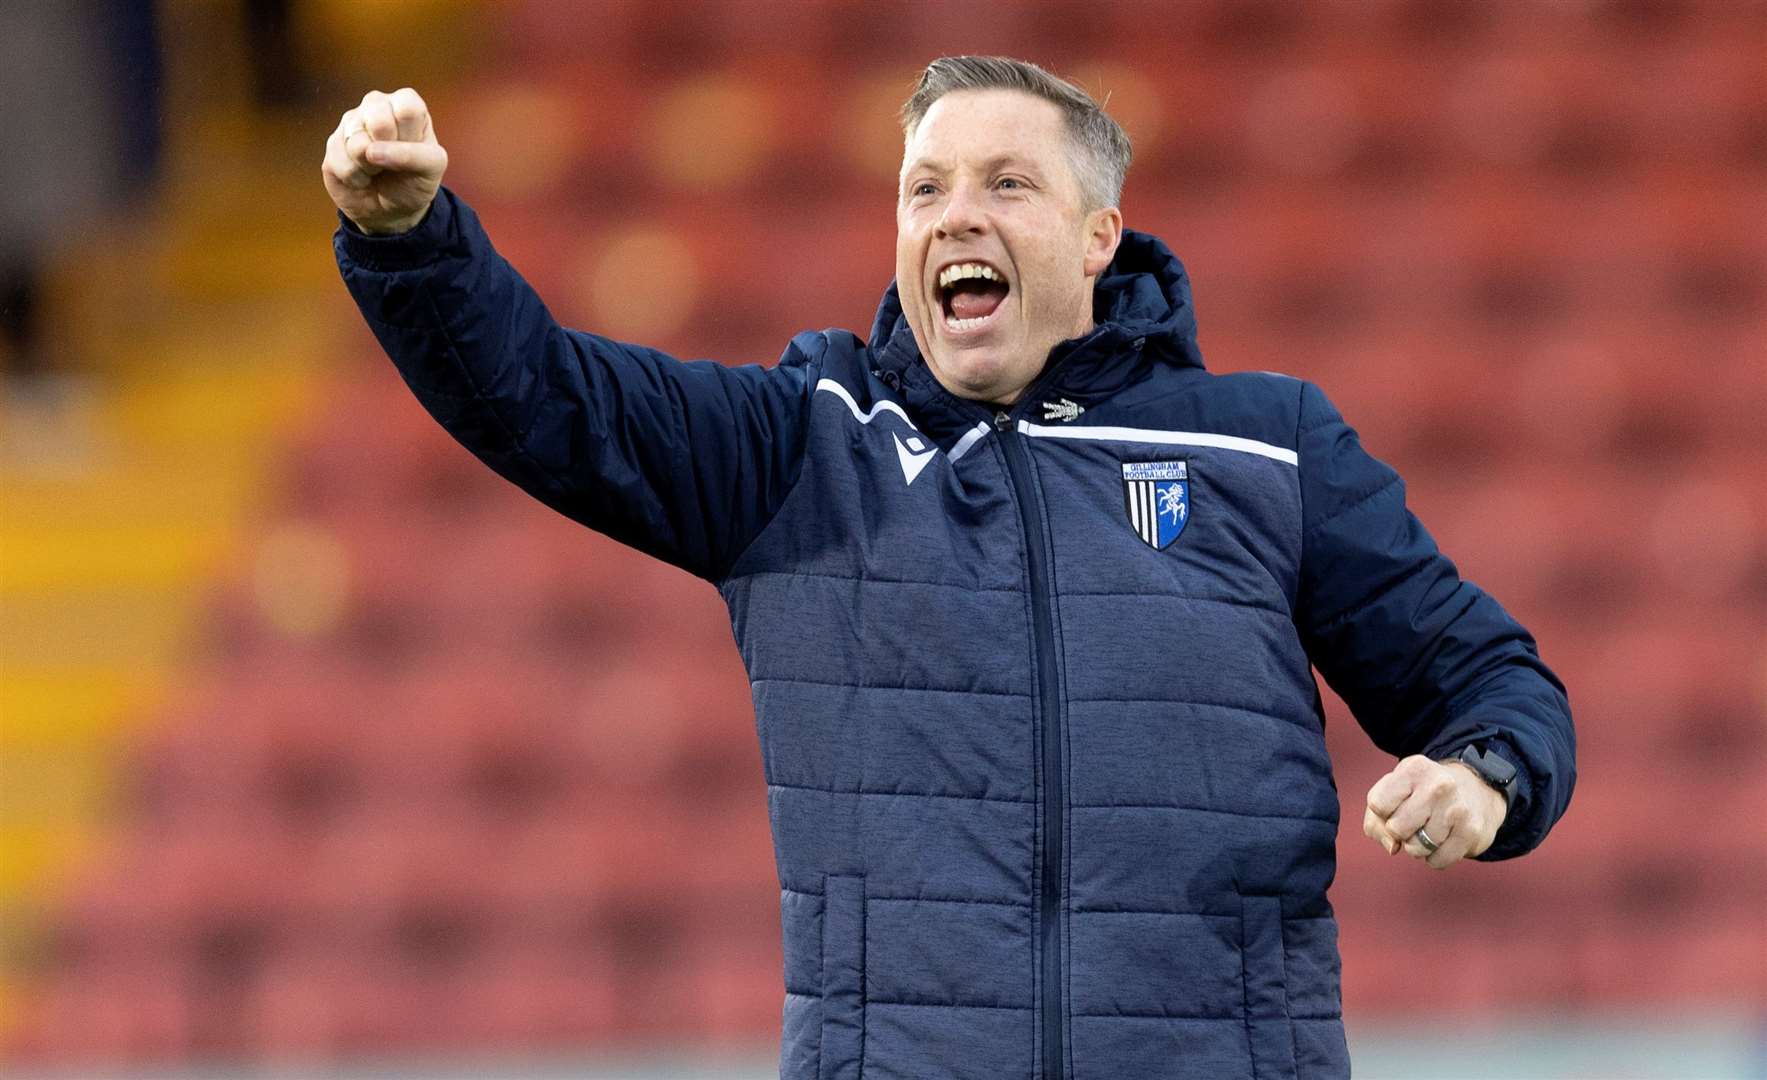 Manager Neil Harris has led the Gills to a run of fine form since January